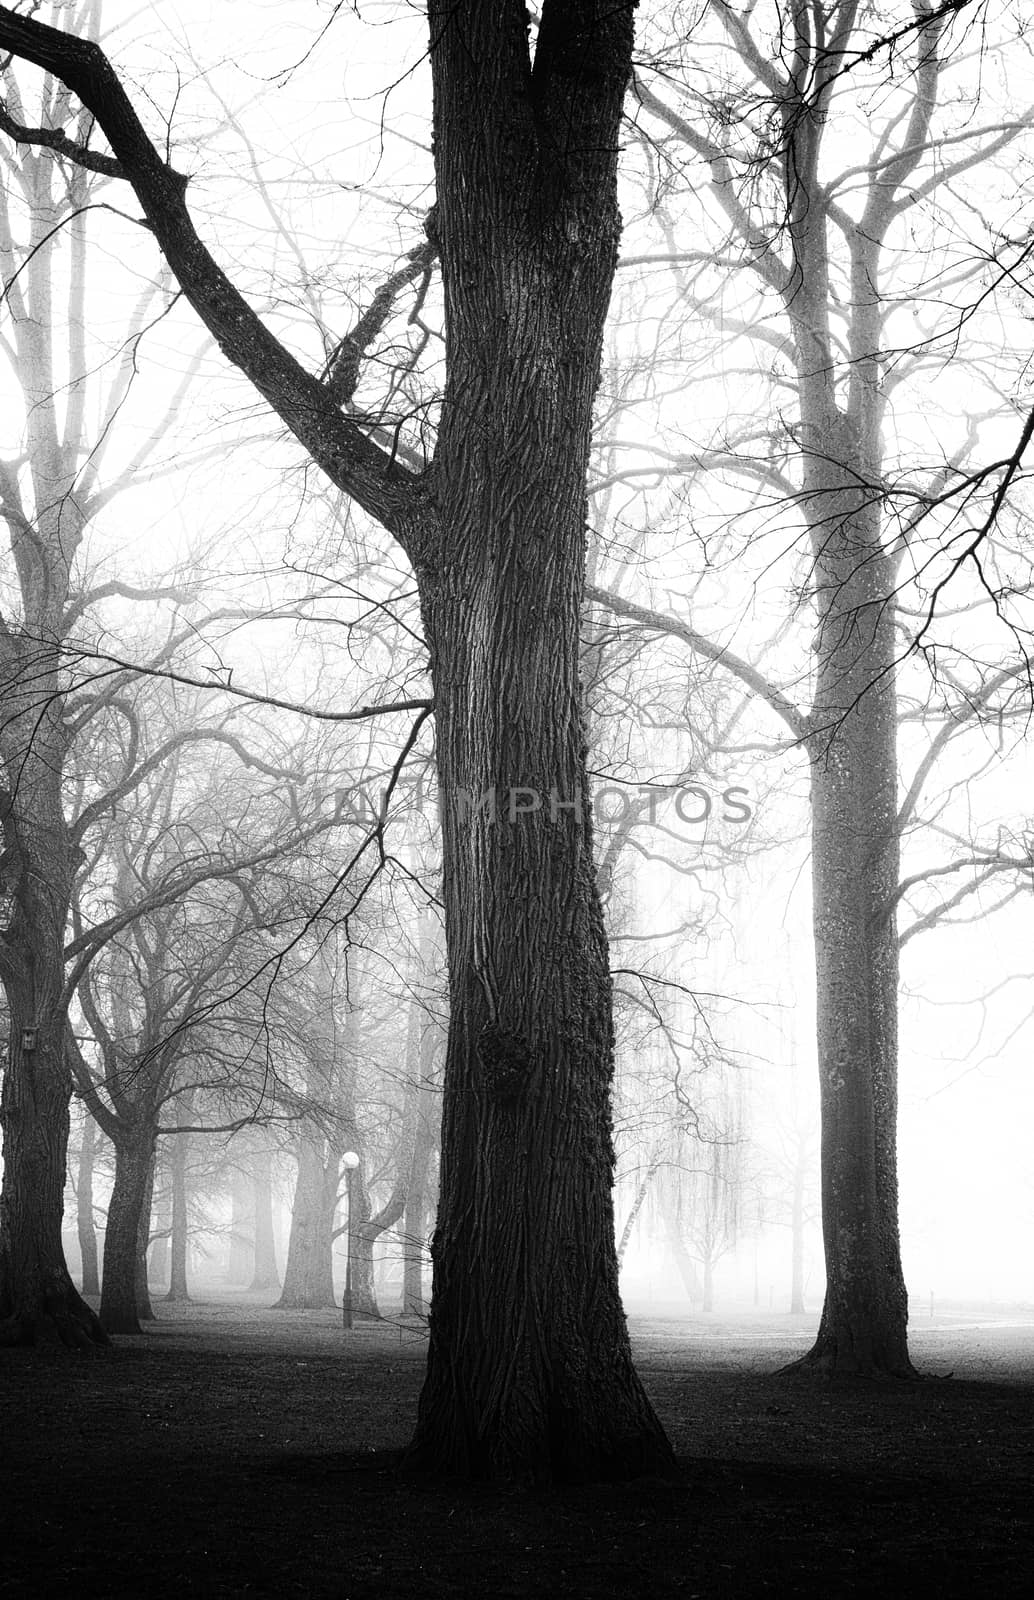 Grungy, textured image of trees in black and white, spooky feeling.